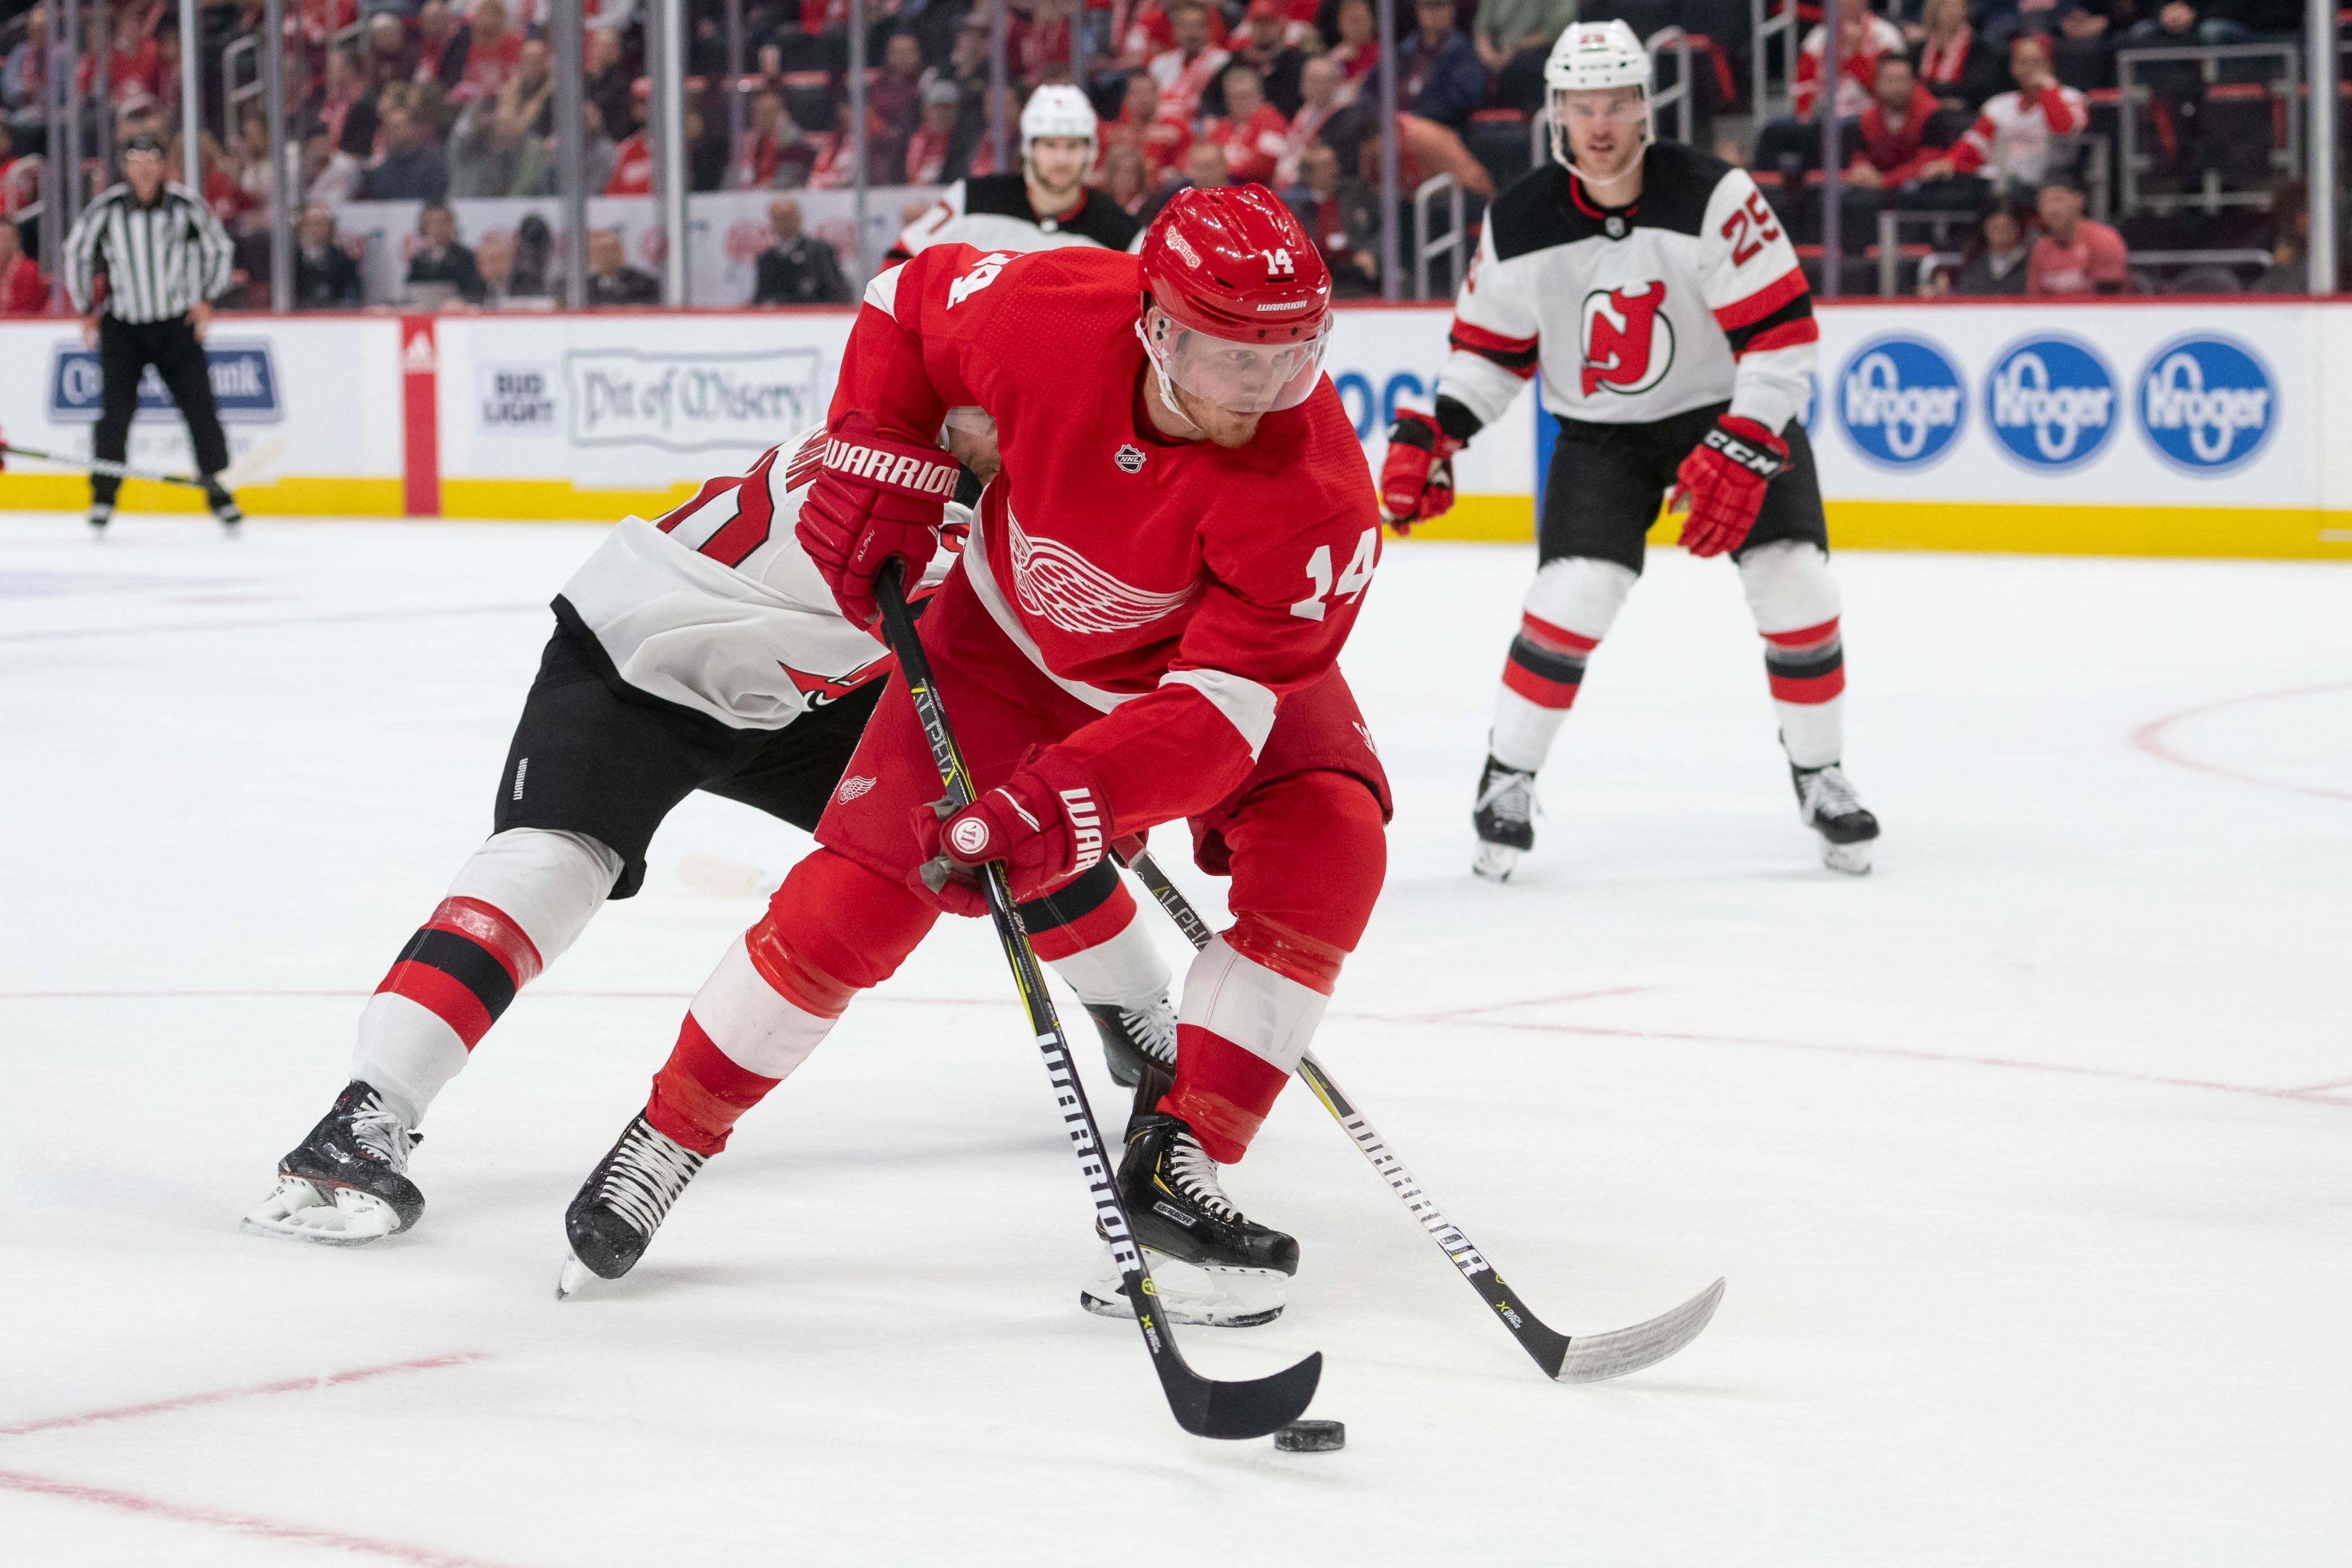 8. Gustav Nyquist, RW, Detroit: It’ll be interesting to see how many teams come calling on Nyquist, who is having a career year. The Wings may work to re-sign him for their veteran core going forward.